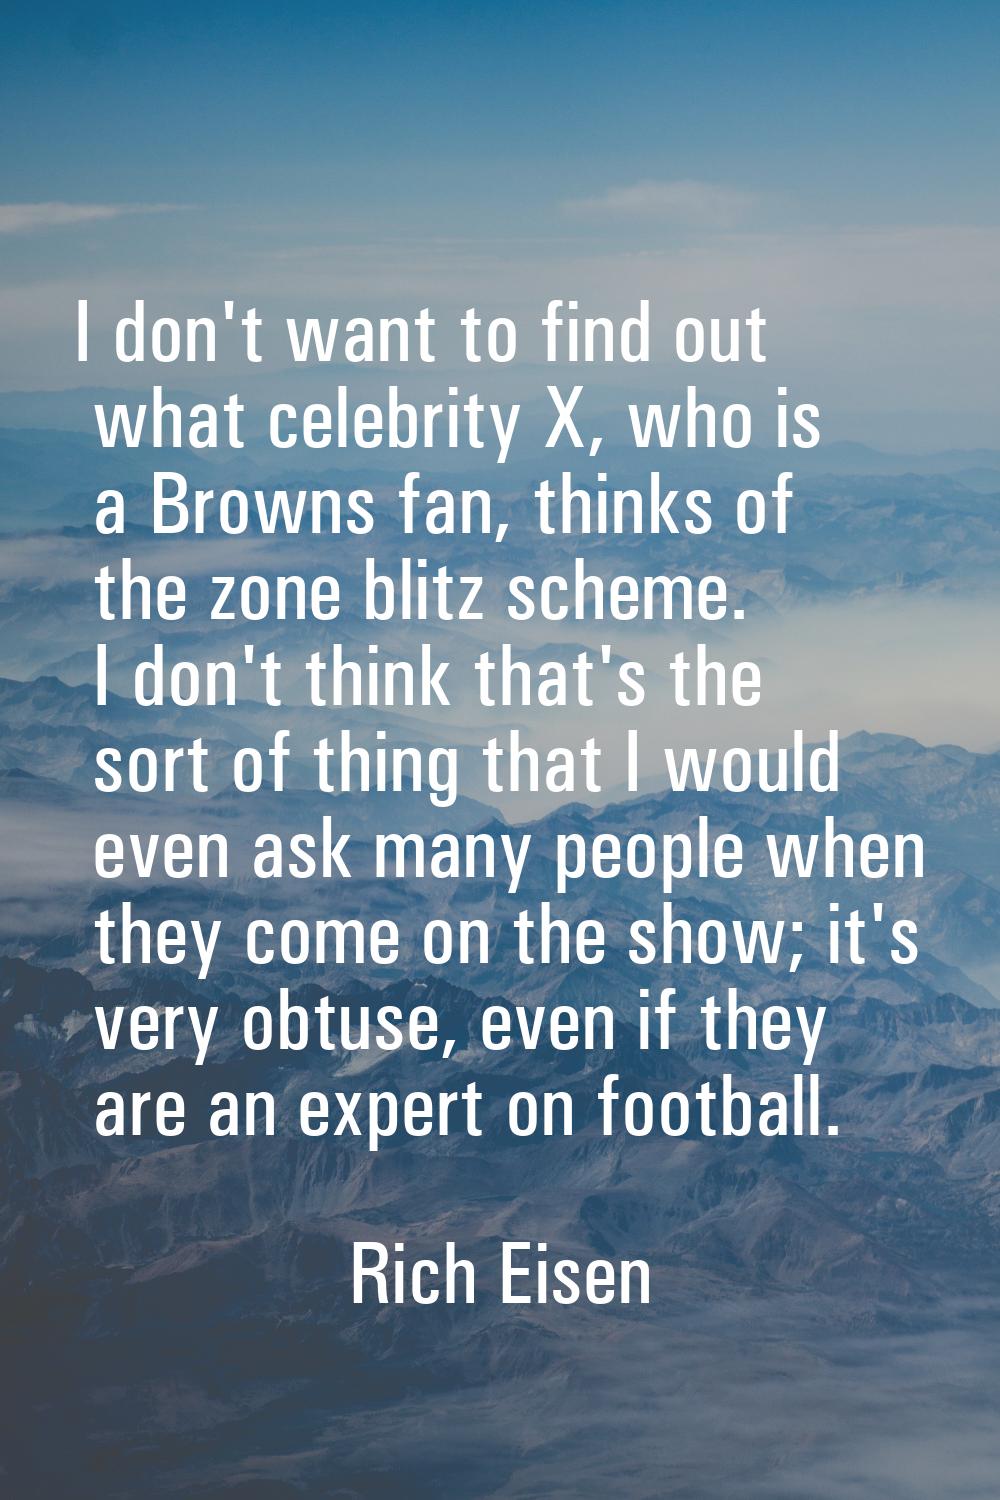 I don't want to find out what celebrity X, who is a Browns fan, thinks of the zone blitz scheme. I 